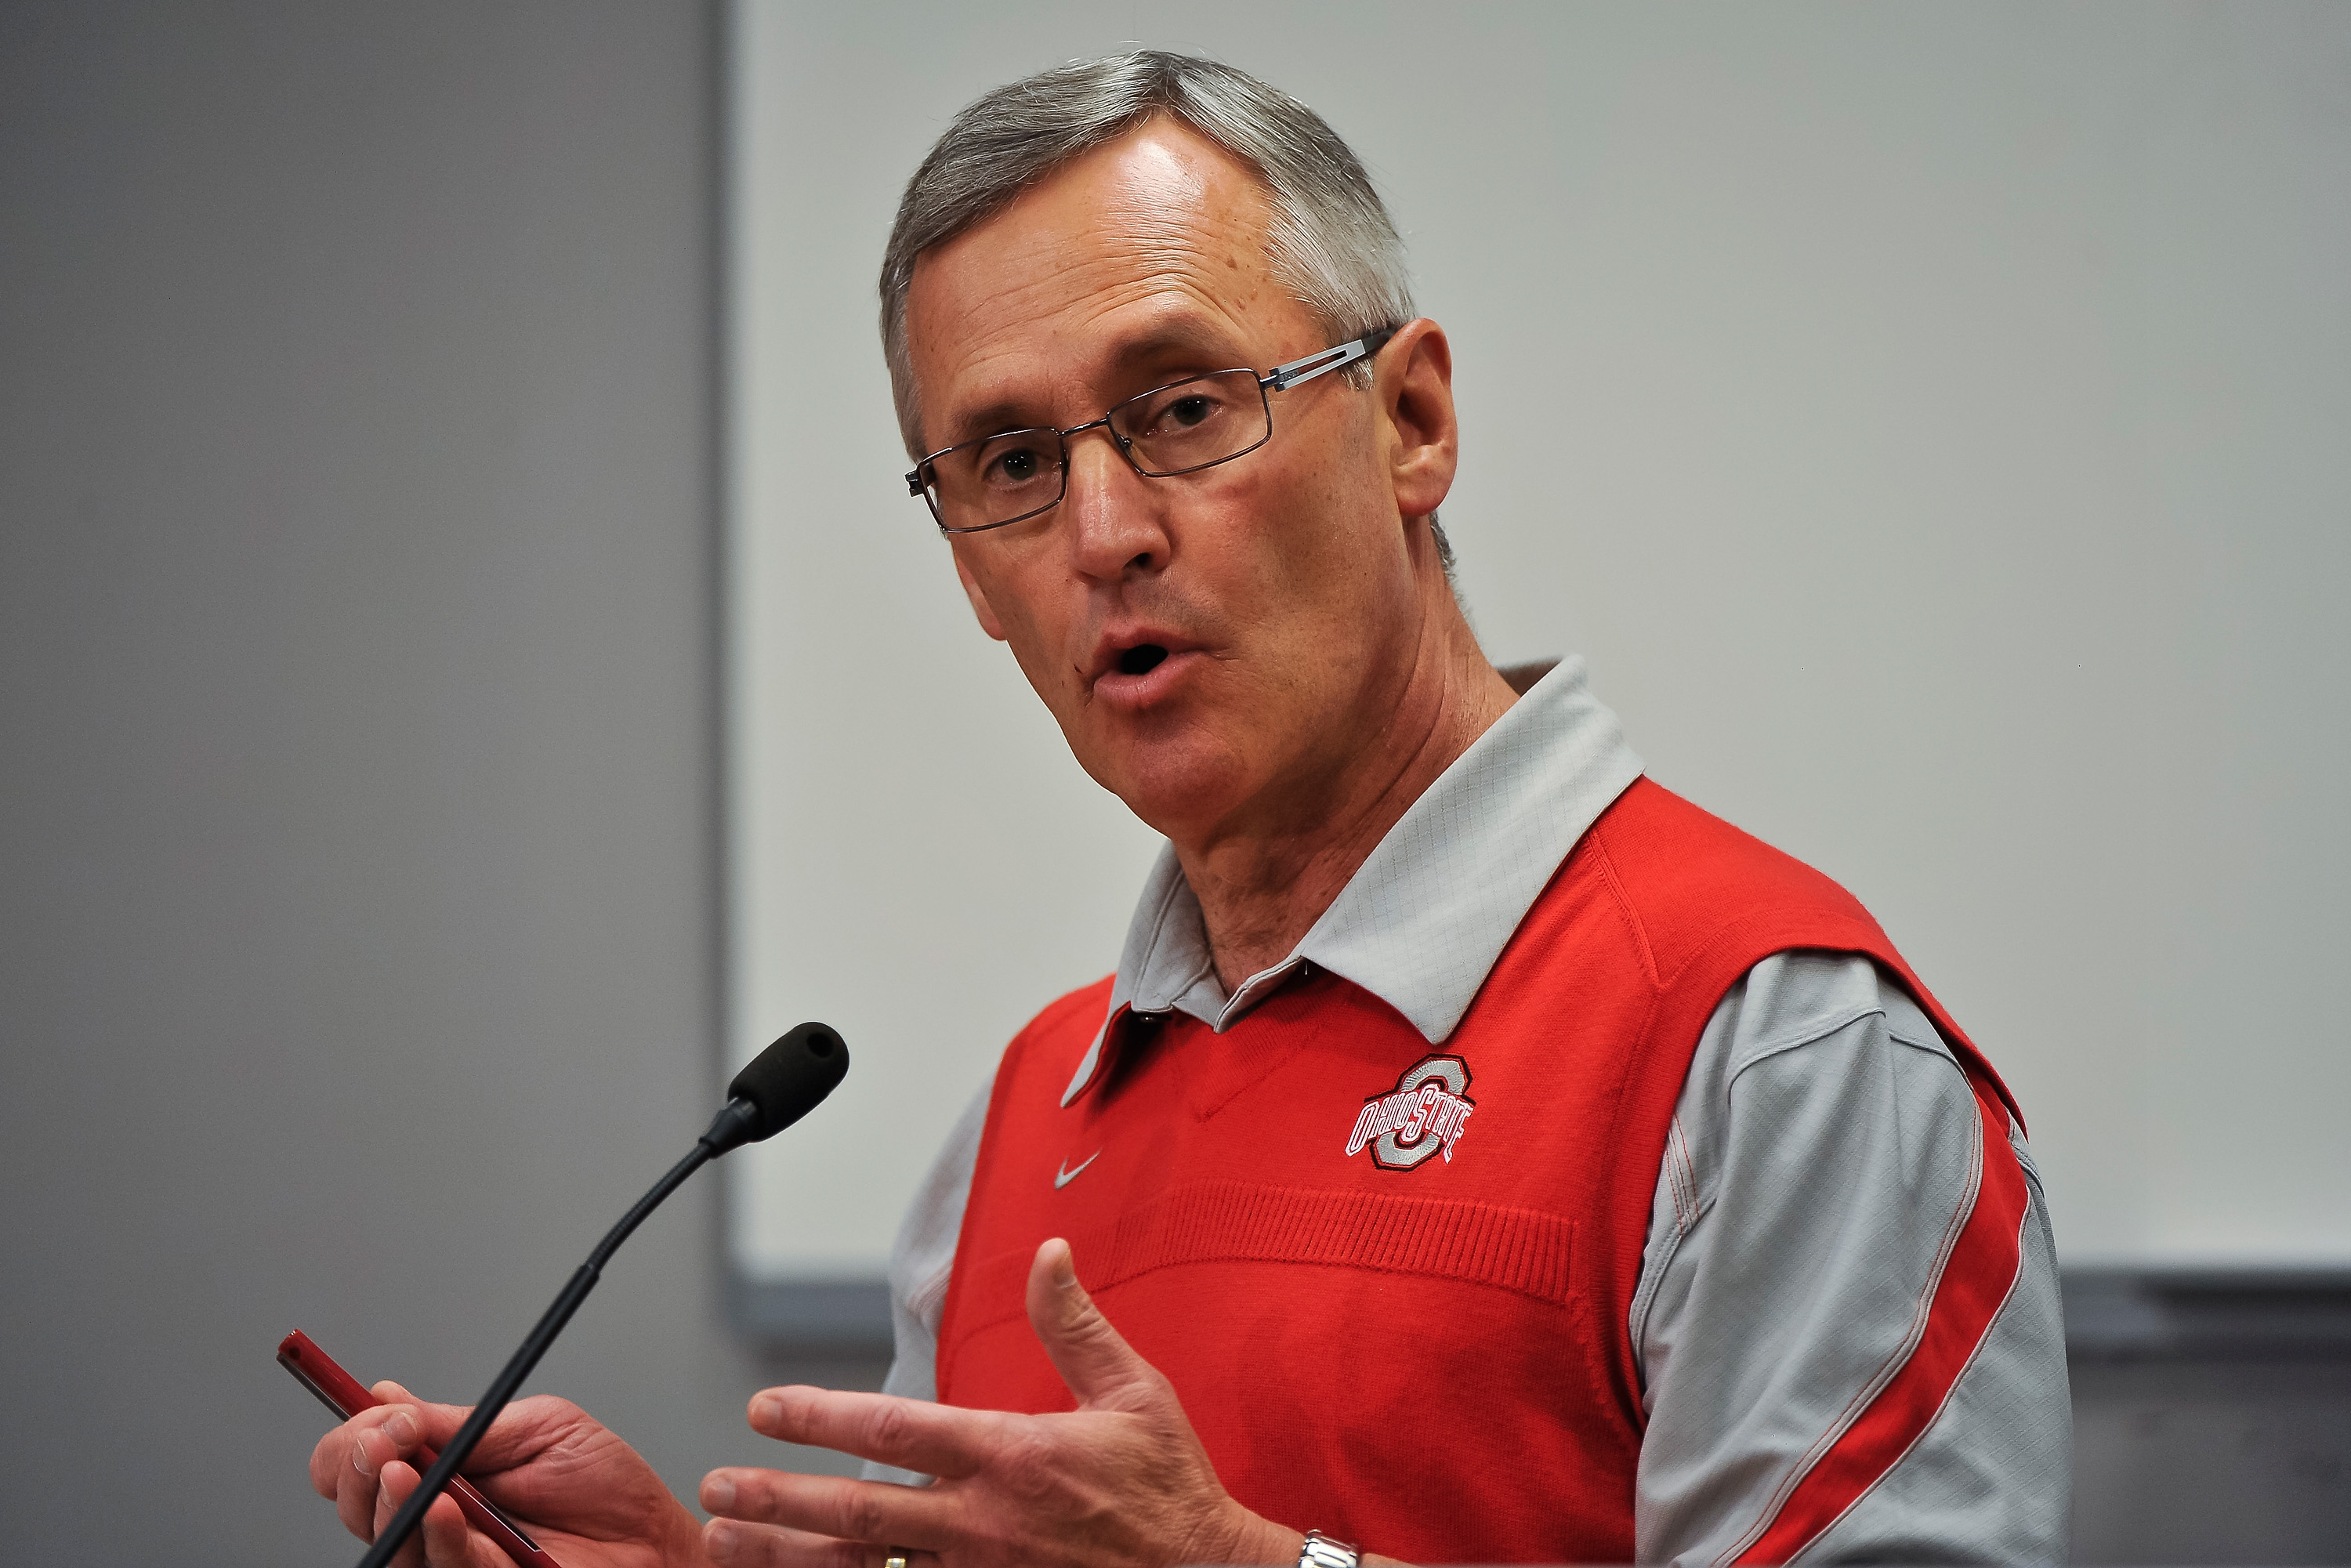 COLUMBUS, OH - MARCH 30:  Head Coach Jim Tressel speaks to the media during a press conference before the start of Spring practices at the Woody Hayes Athletic Center at The Ohio State University on March 30, 2011 in Columbus, Ohio. (Photo by Jamie Sabau/